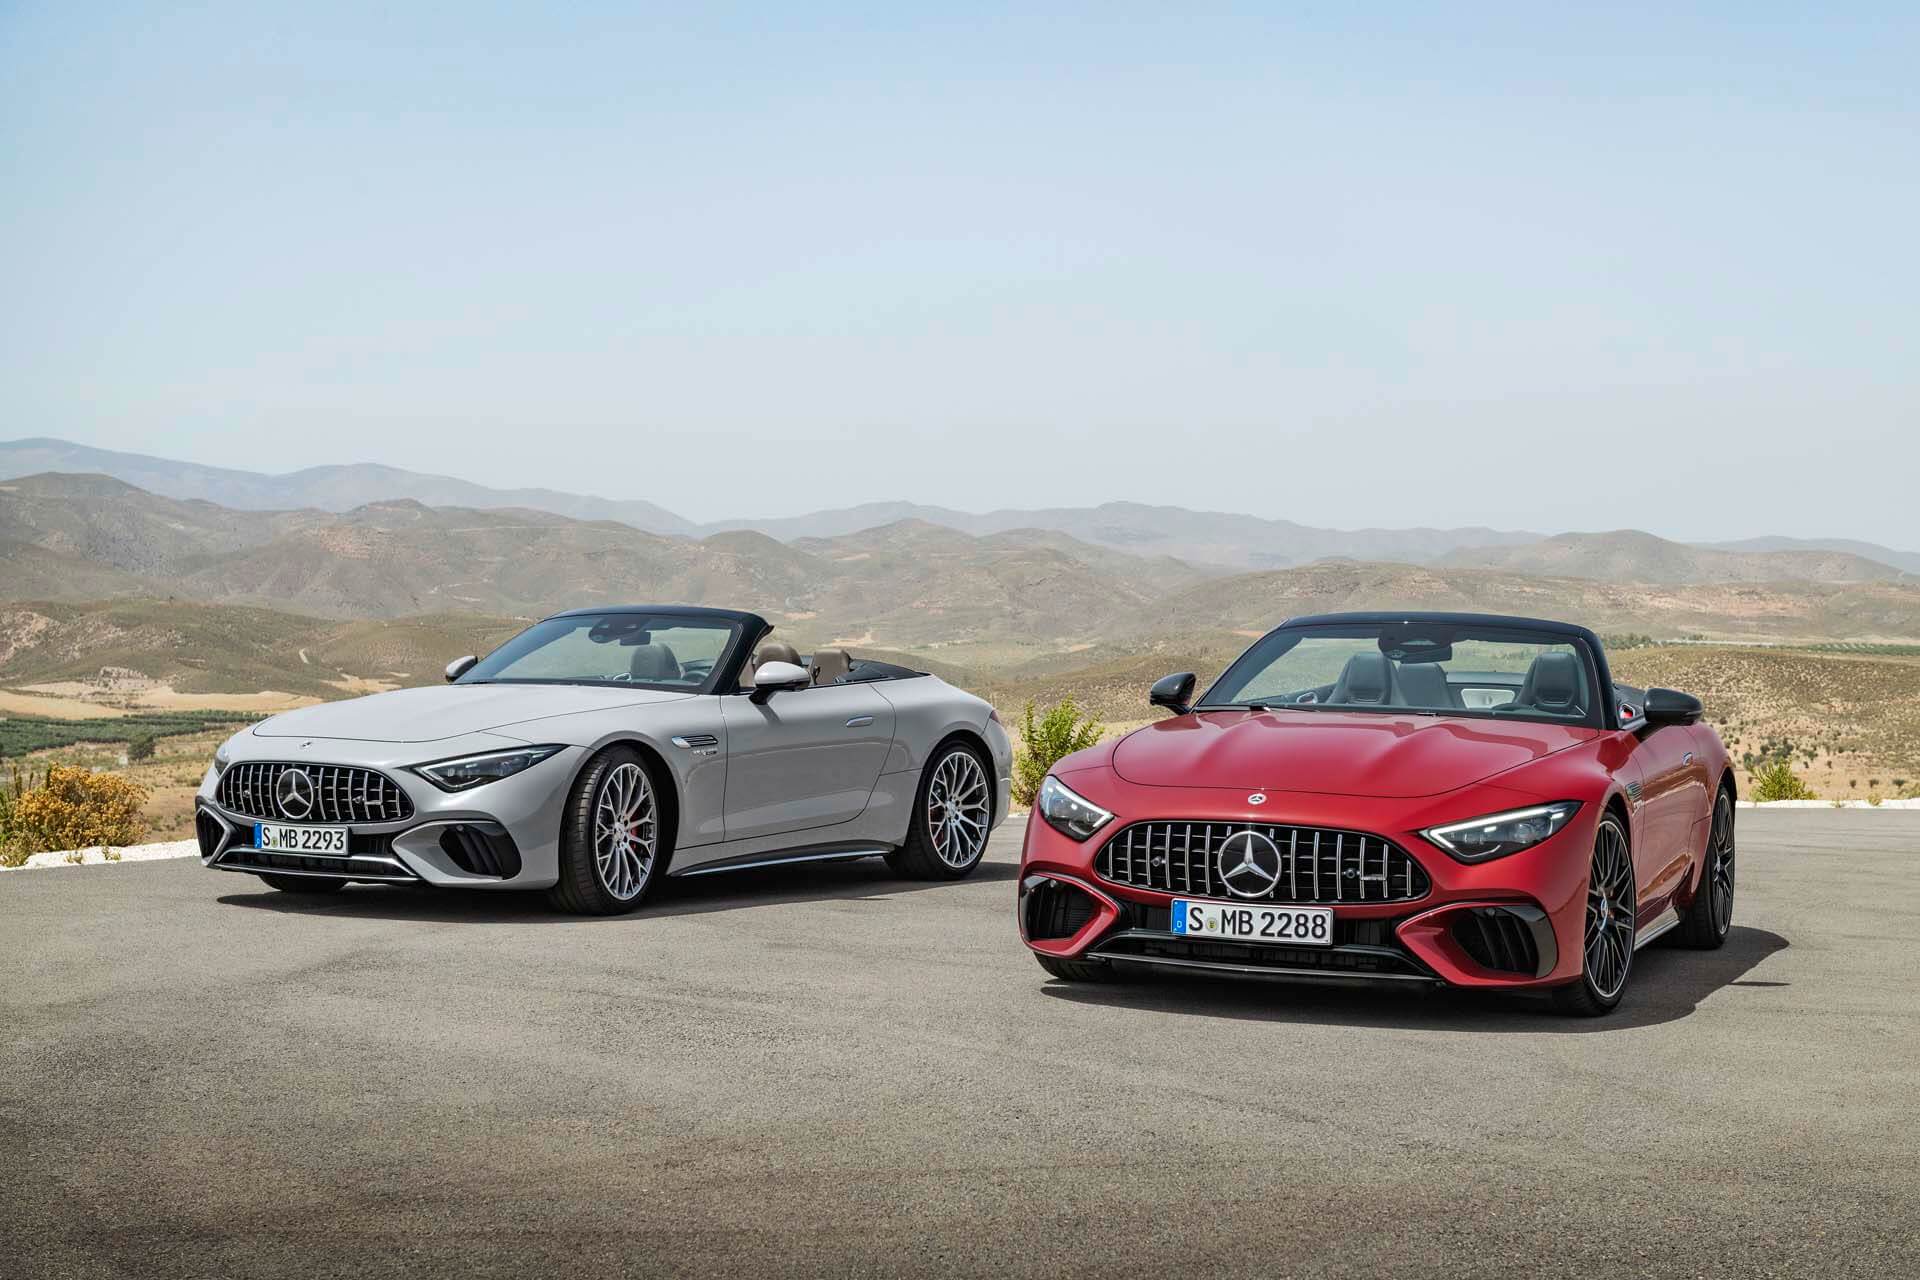 All-new Mercedes SL is an absolute show stopper